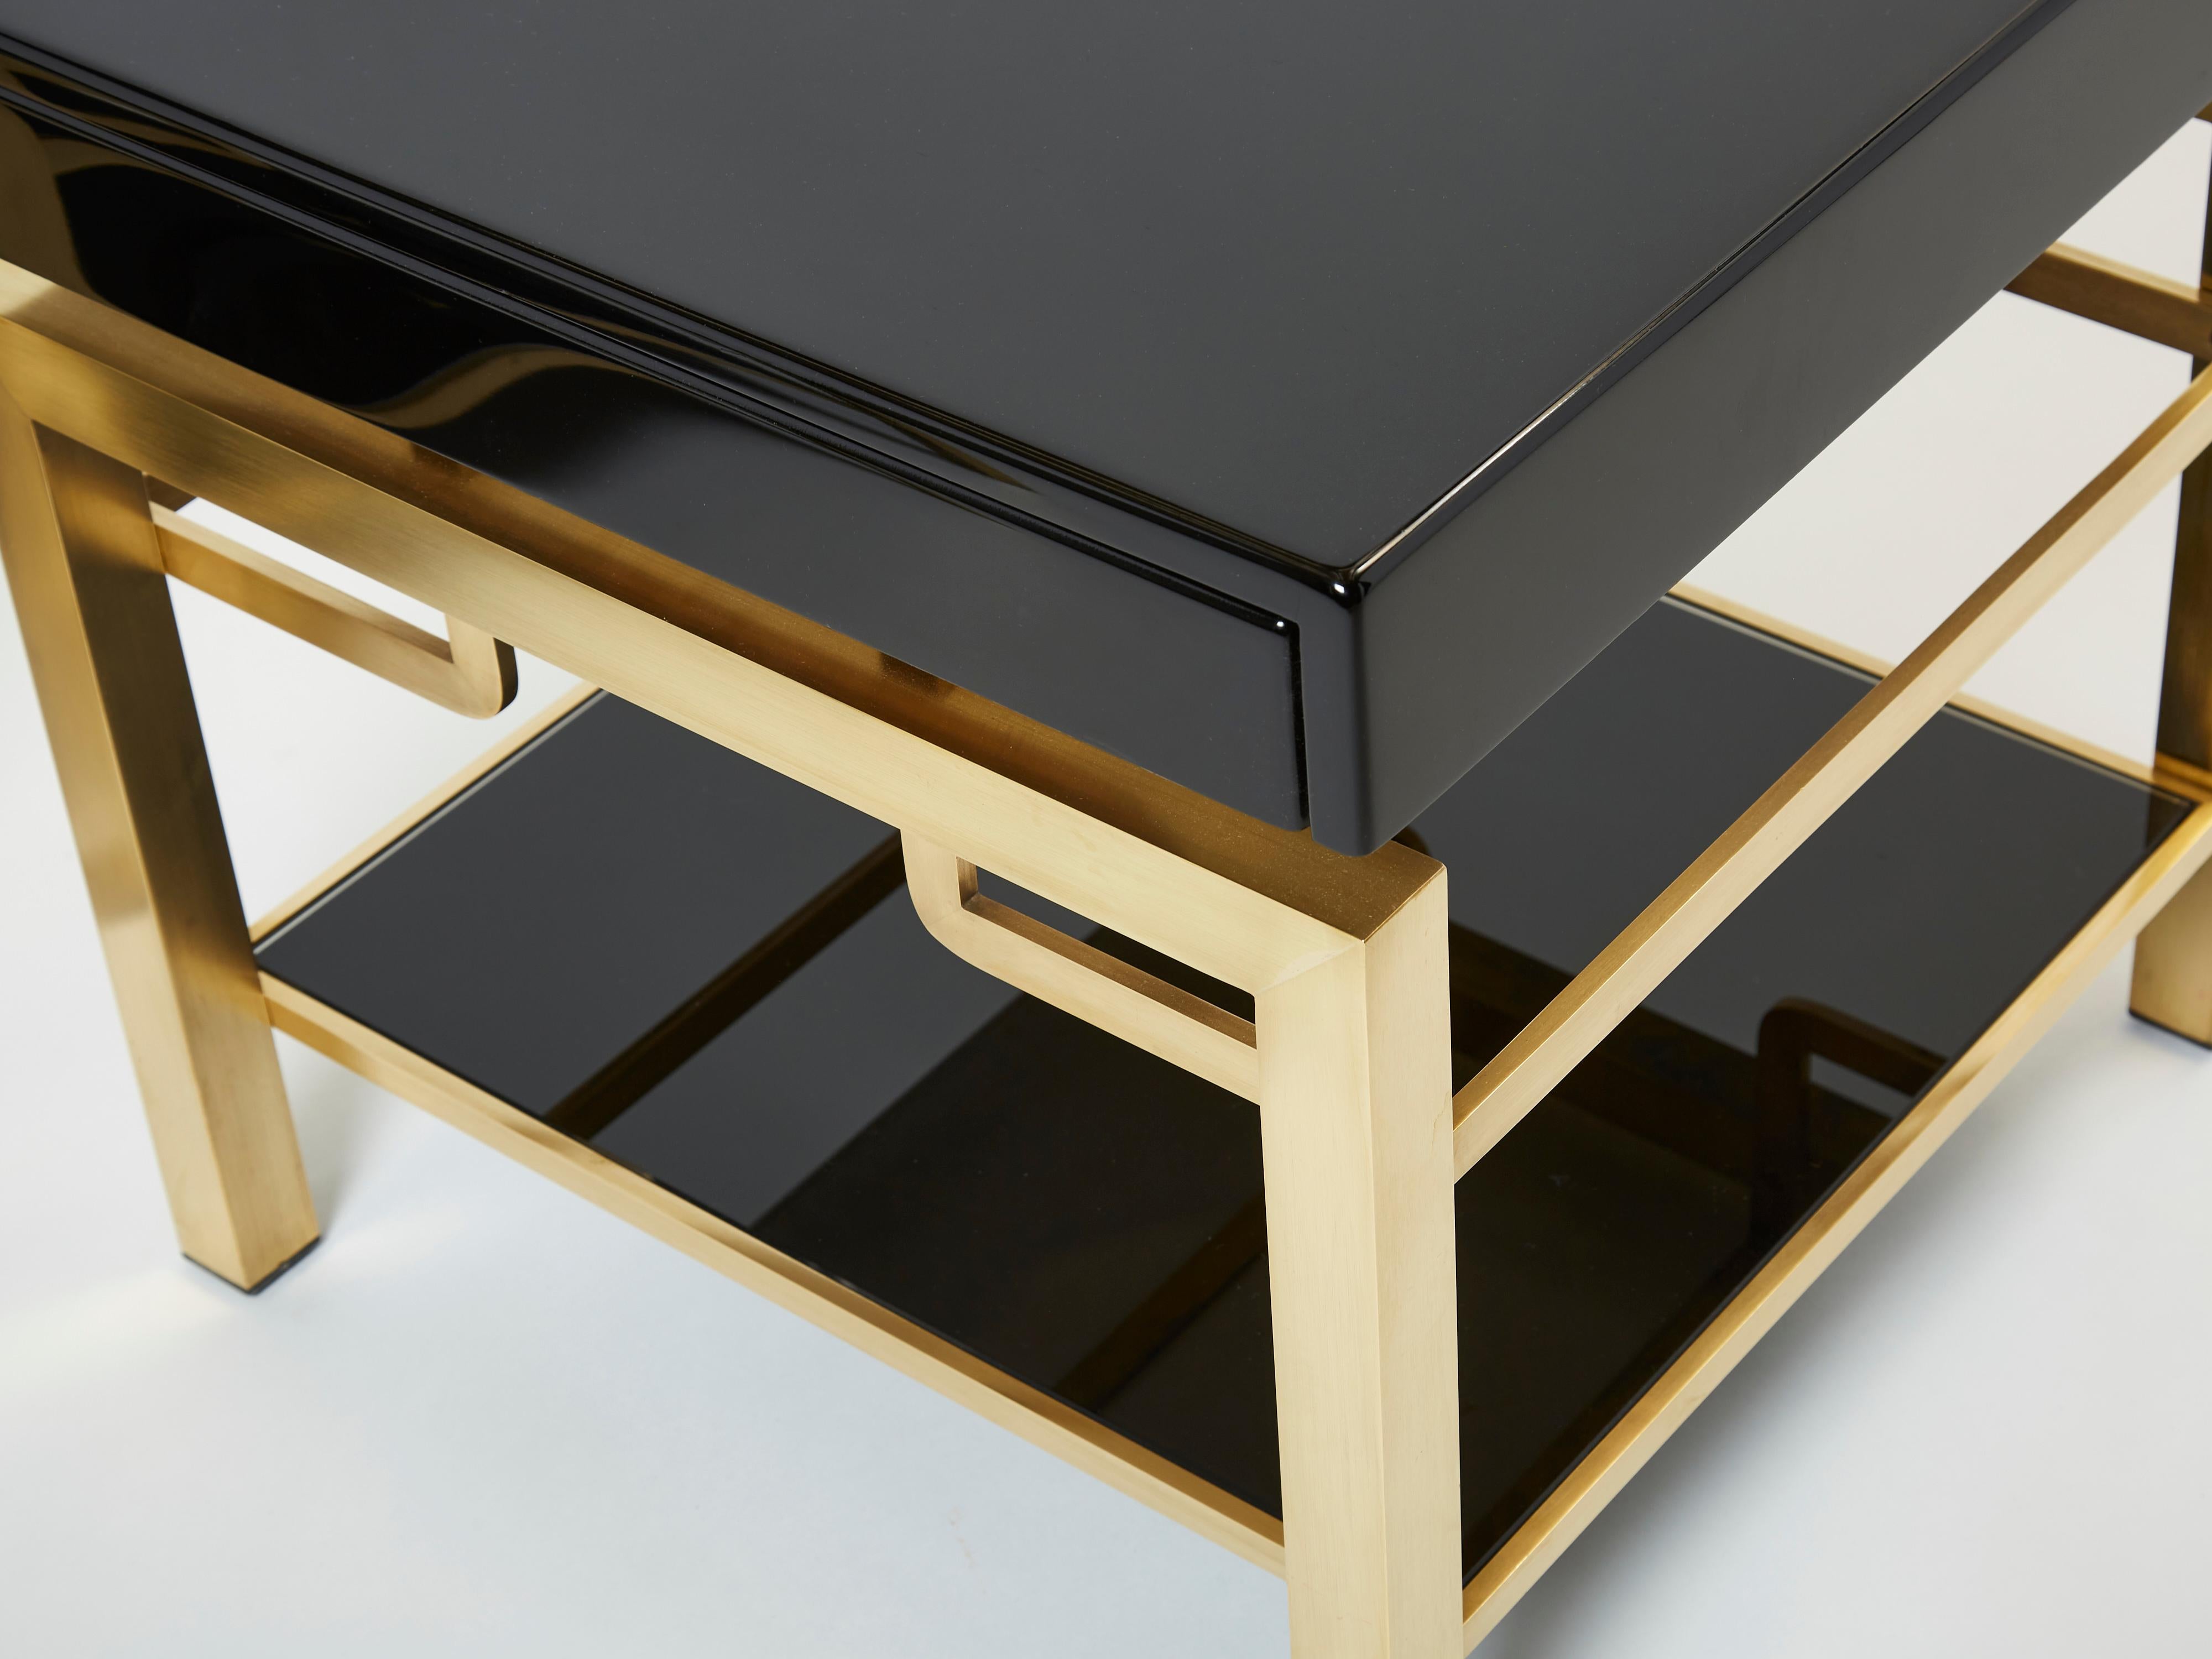 Late 20th Century Black Lacquer Brass Two-Tier End Tables Guy Lefevre for Maison Jansen, 1970s For Sale